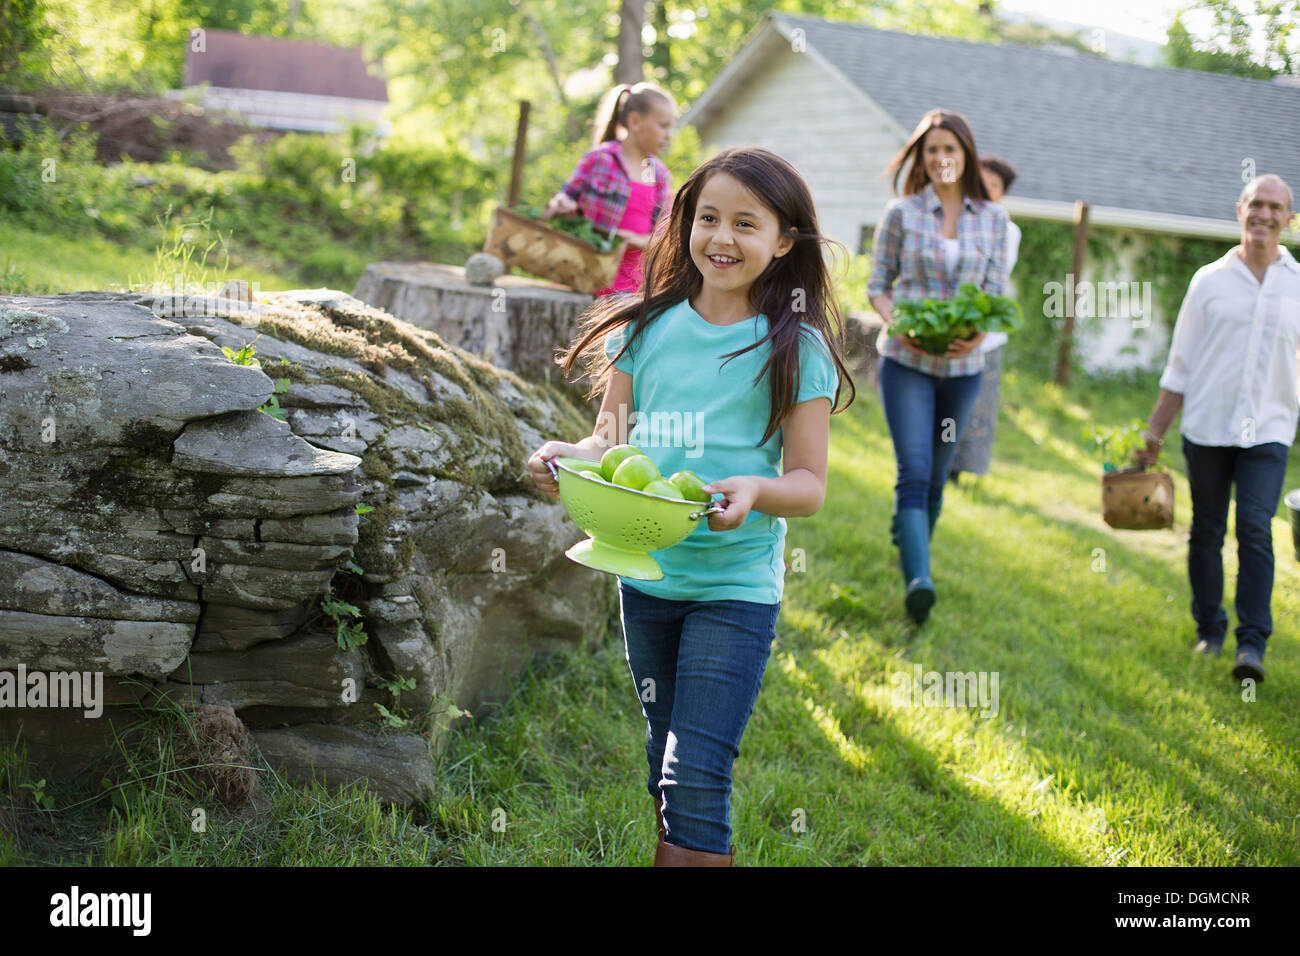 Organic farm. Summer party. A family carrying baskets and bowls of food across the grass. Stock Photo